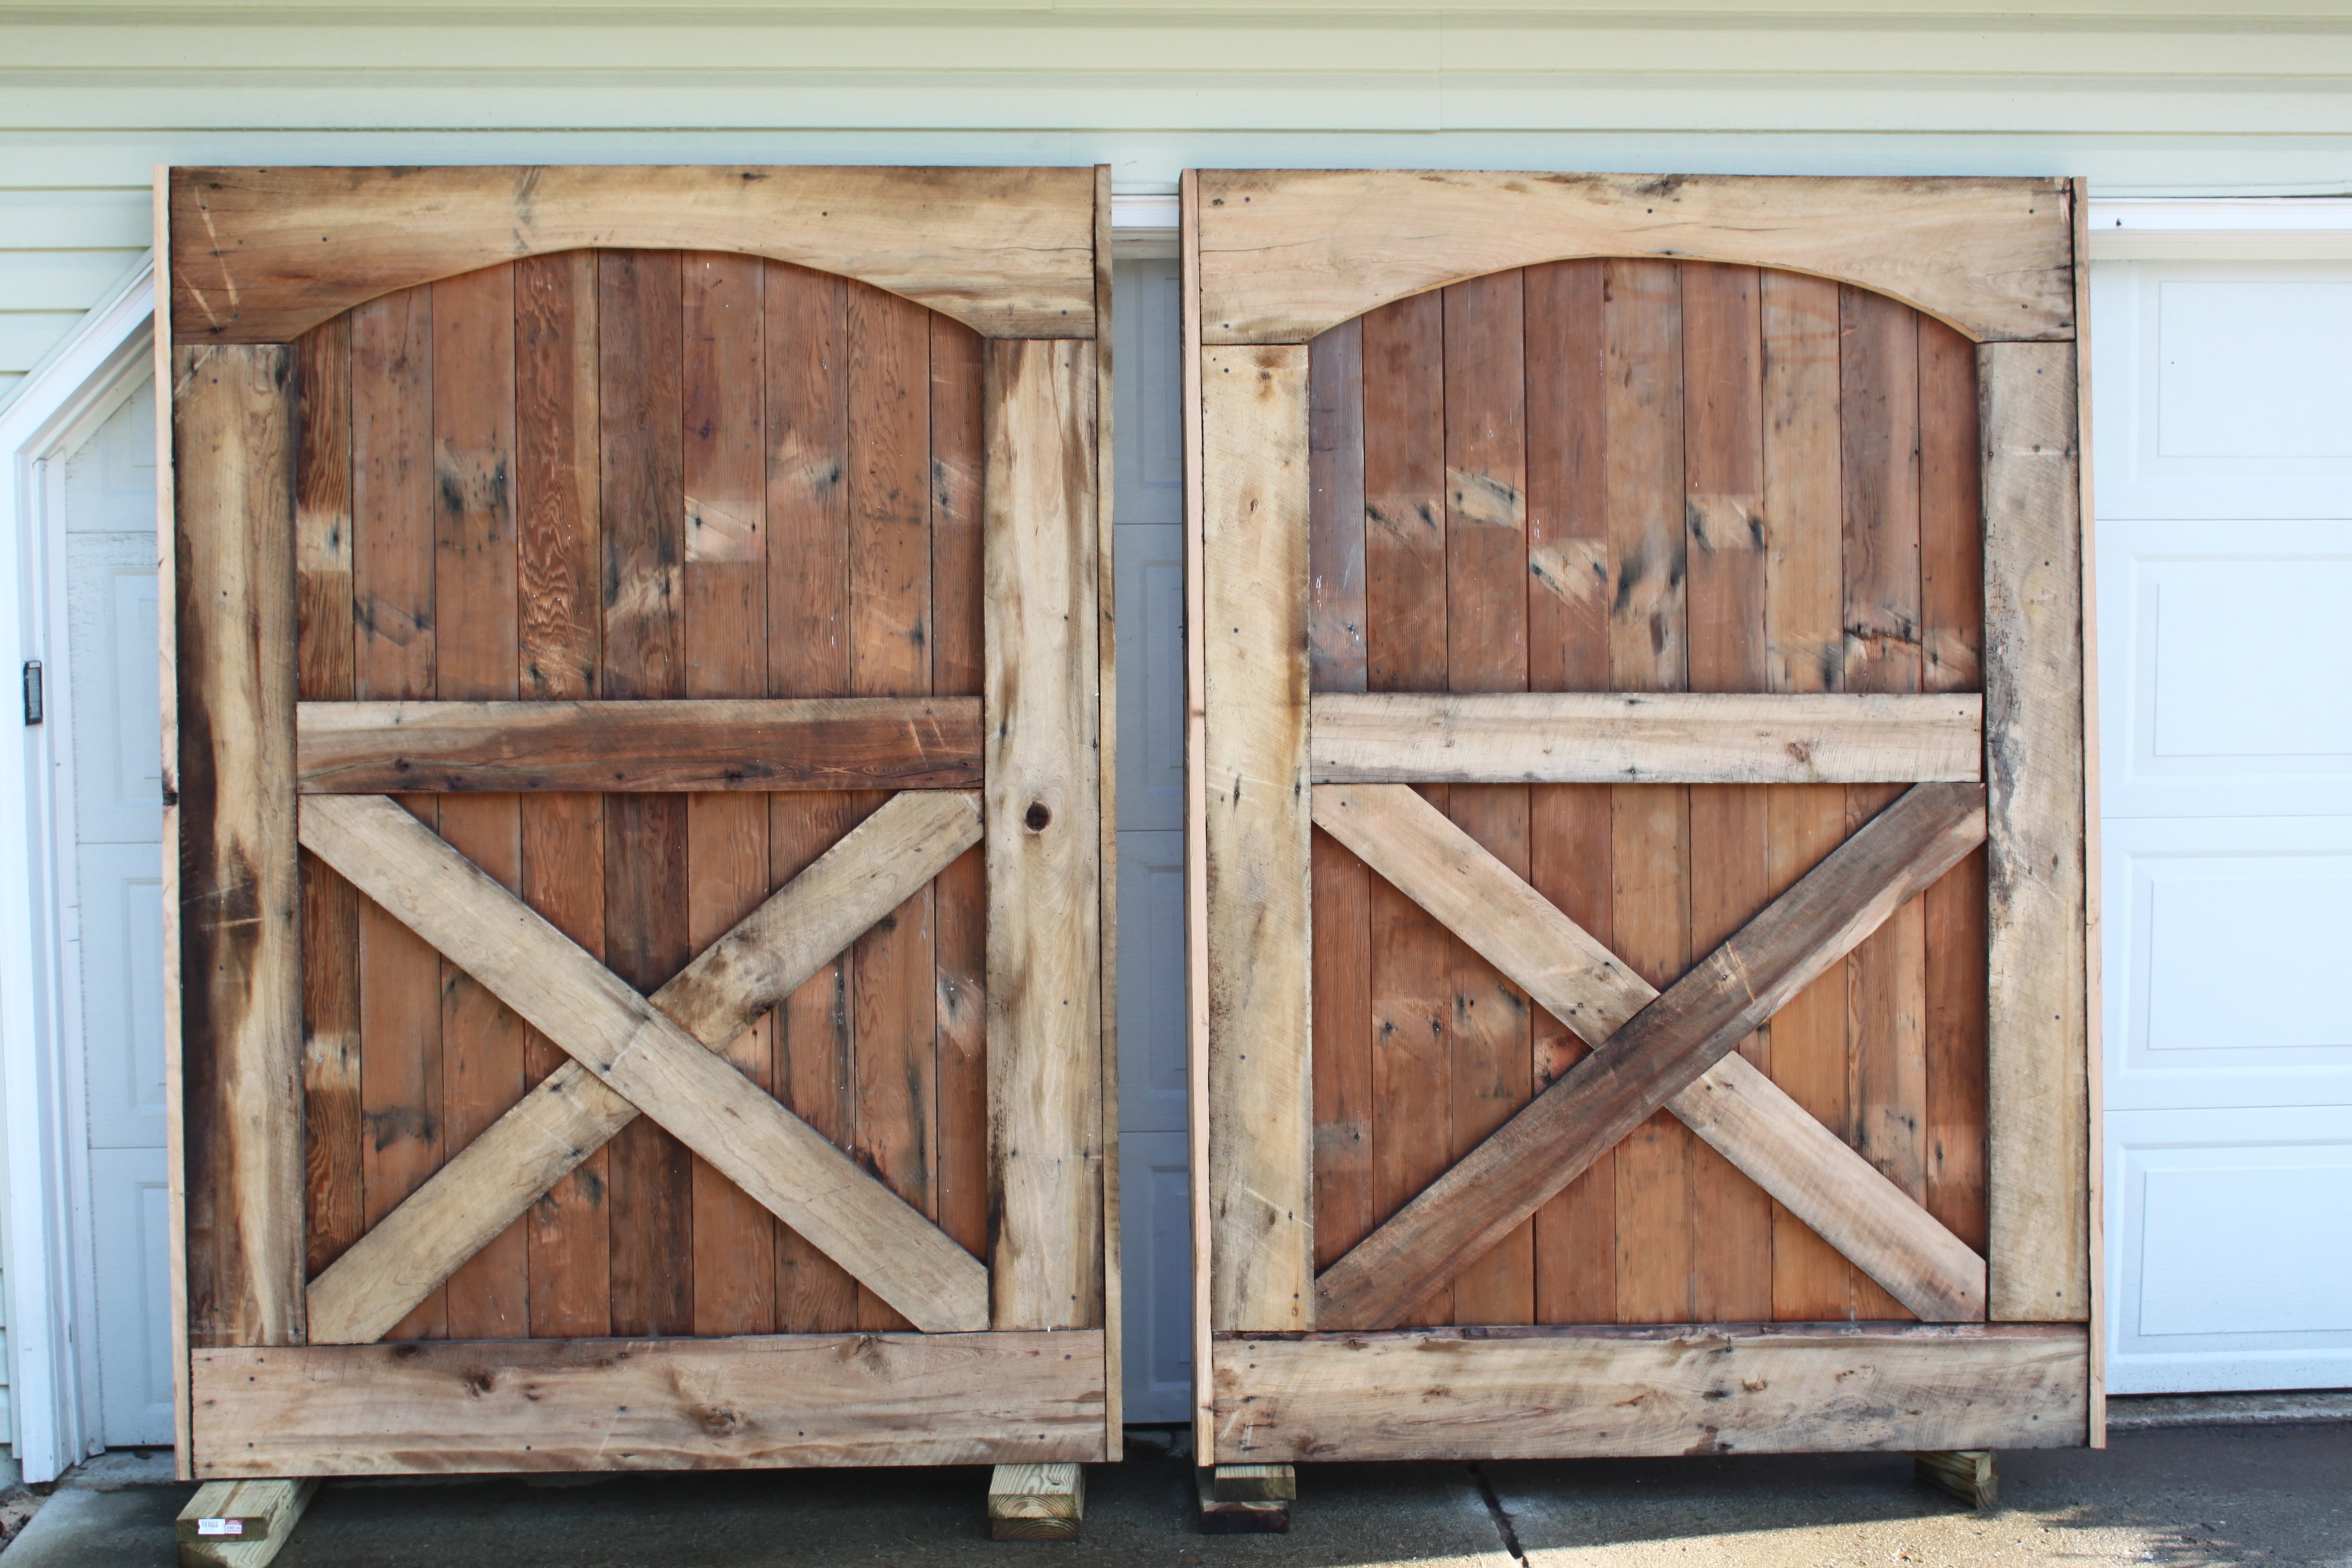 Home » Shed Building » How To Build A Barn Style Shed Door